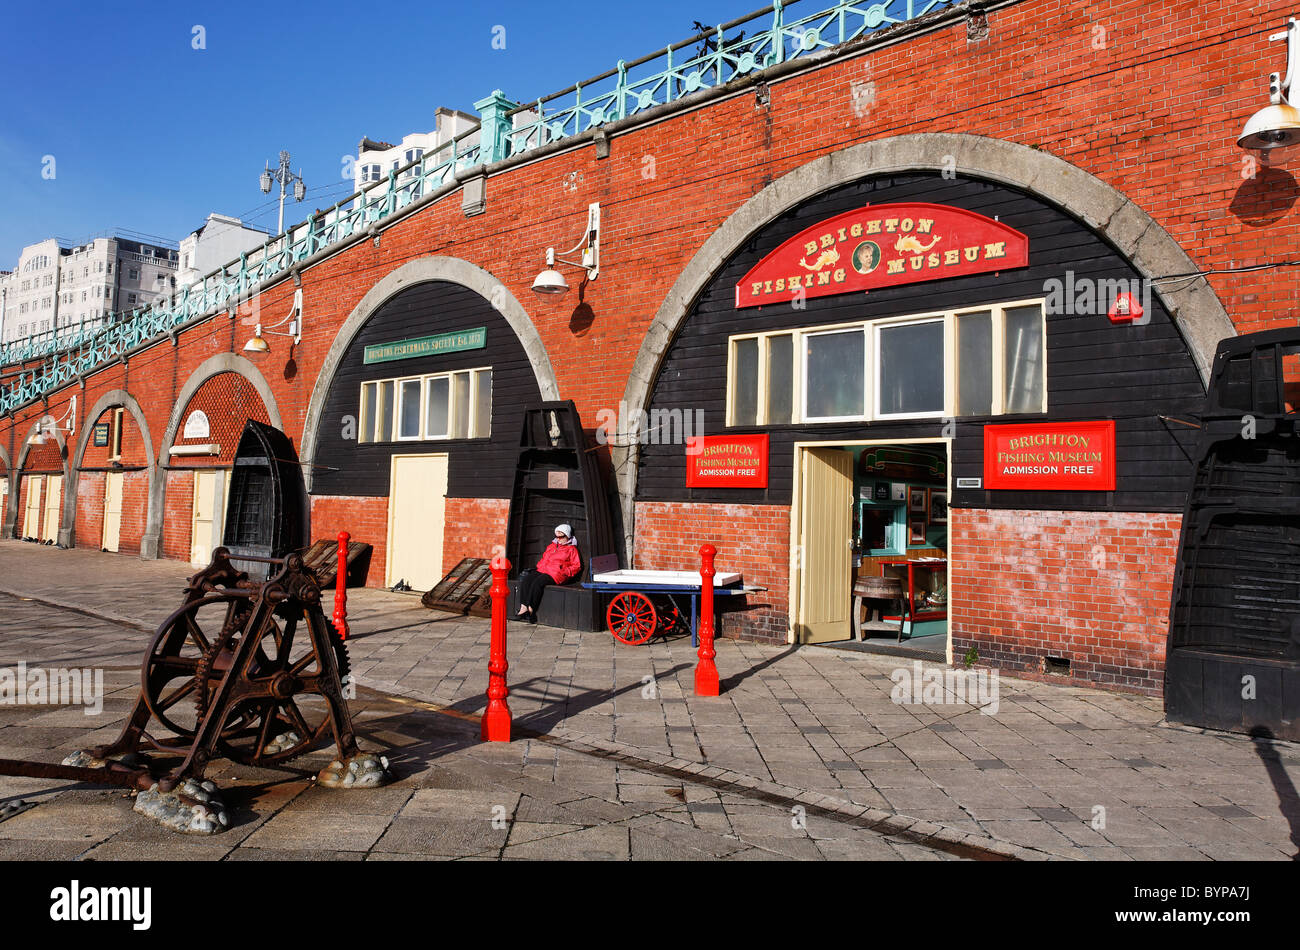 The Fishing Museum on the seafront at Brighton, East Sussex, England Stock Photo